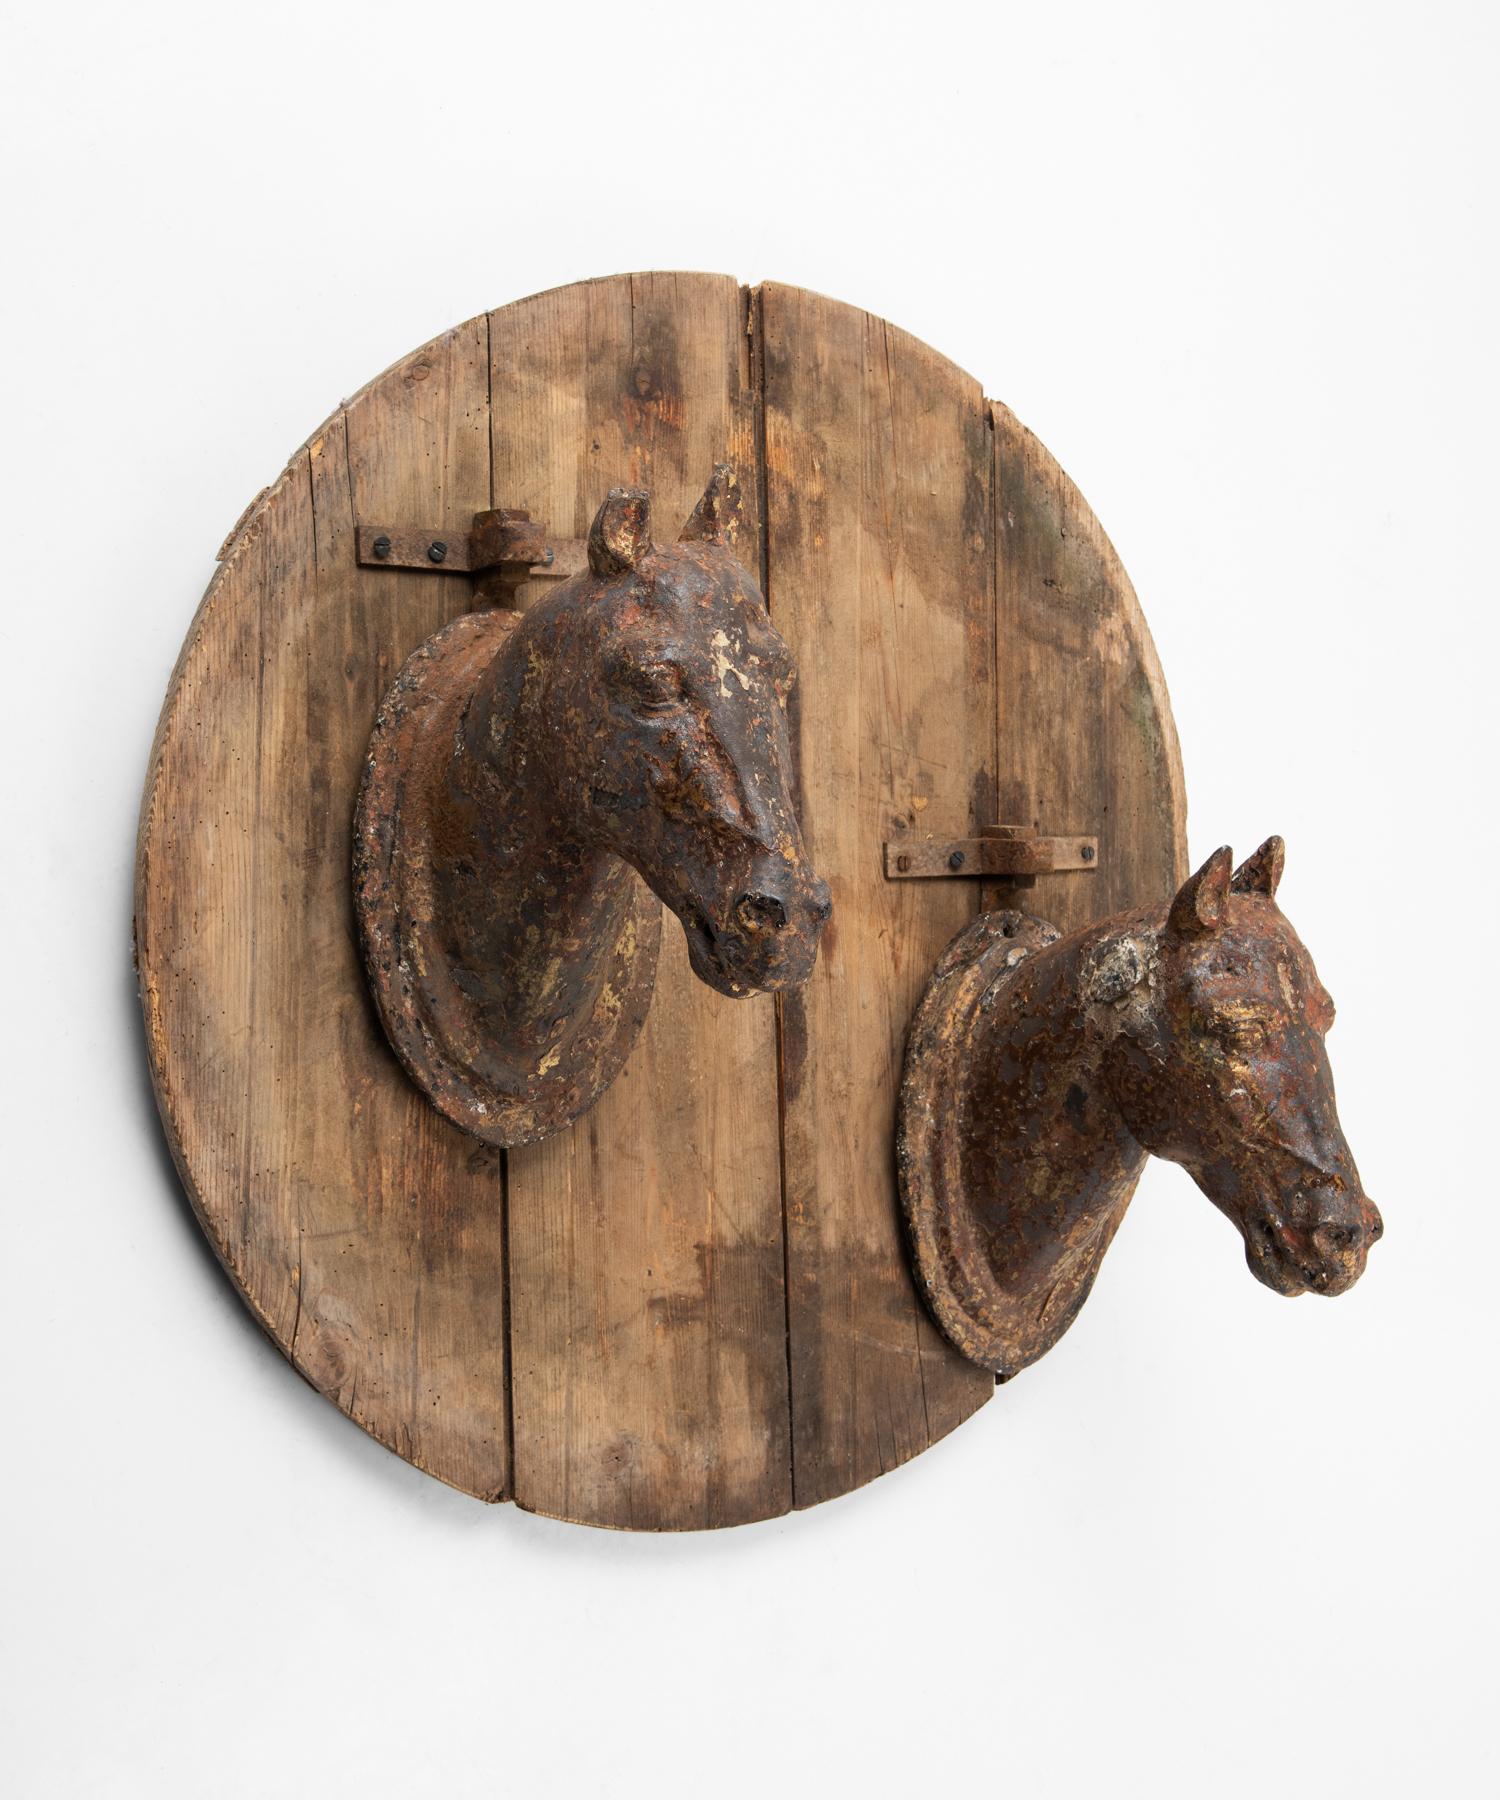 Cast iron horse stabile sign, France, circa 1800.

Cast iron horse heads mounted on original primitive pine board.